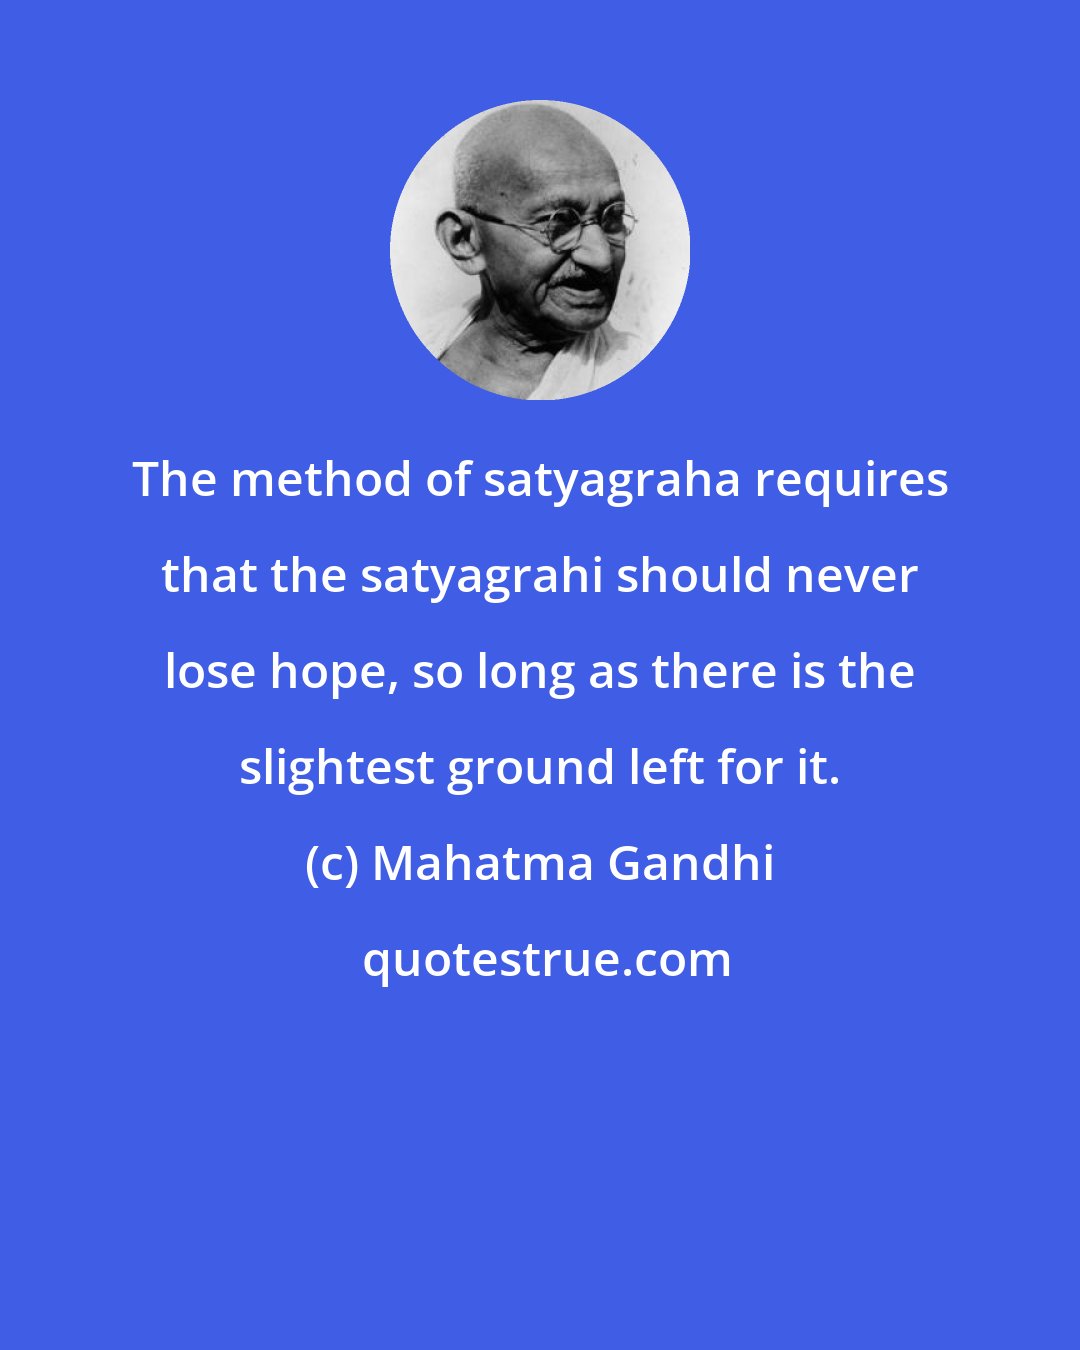 Mahatma Gandhi: The method of satyagraha requires that the satyagrahi should never lose hope, so long as there is the slightest ground left for it.